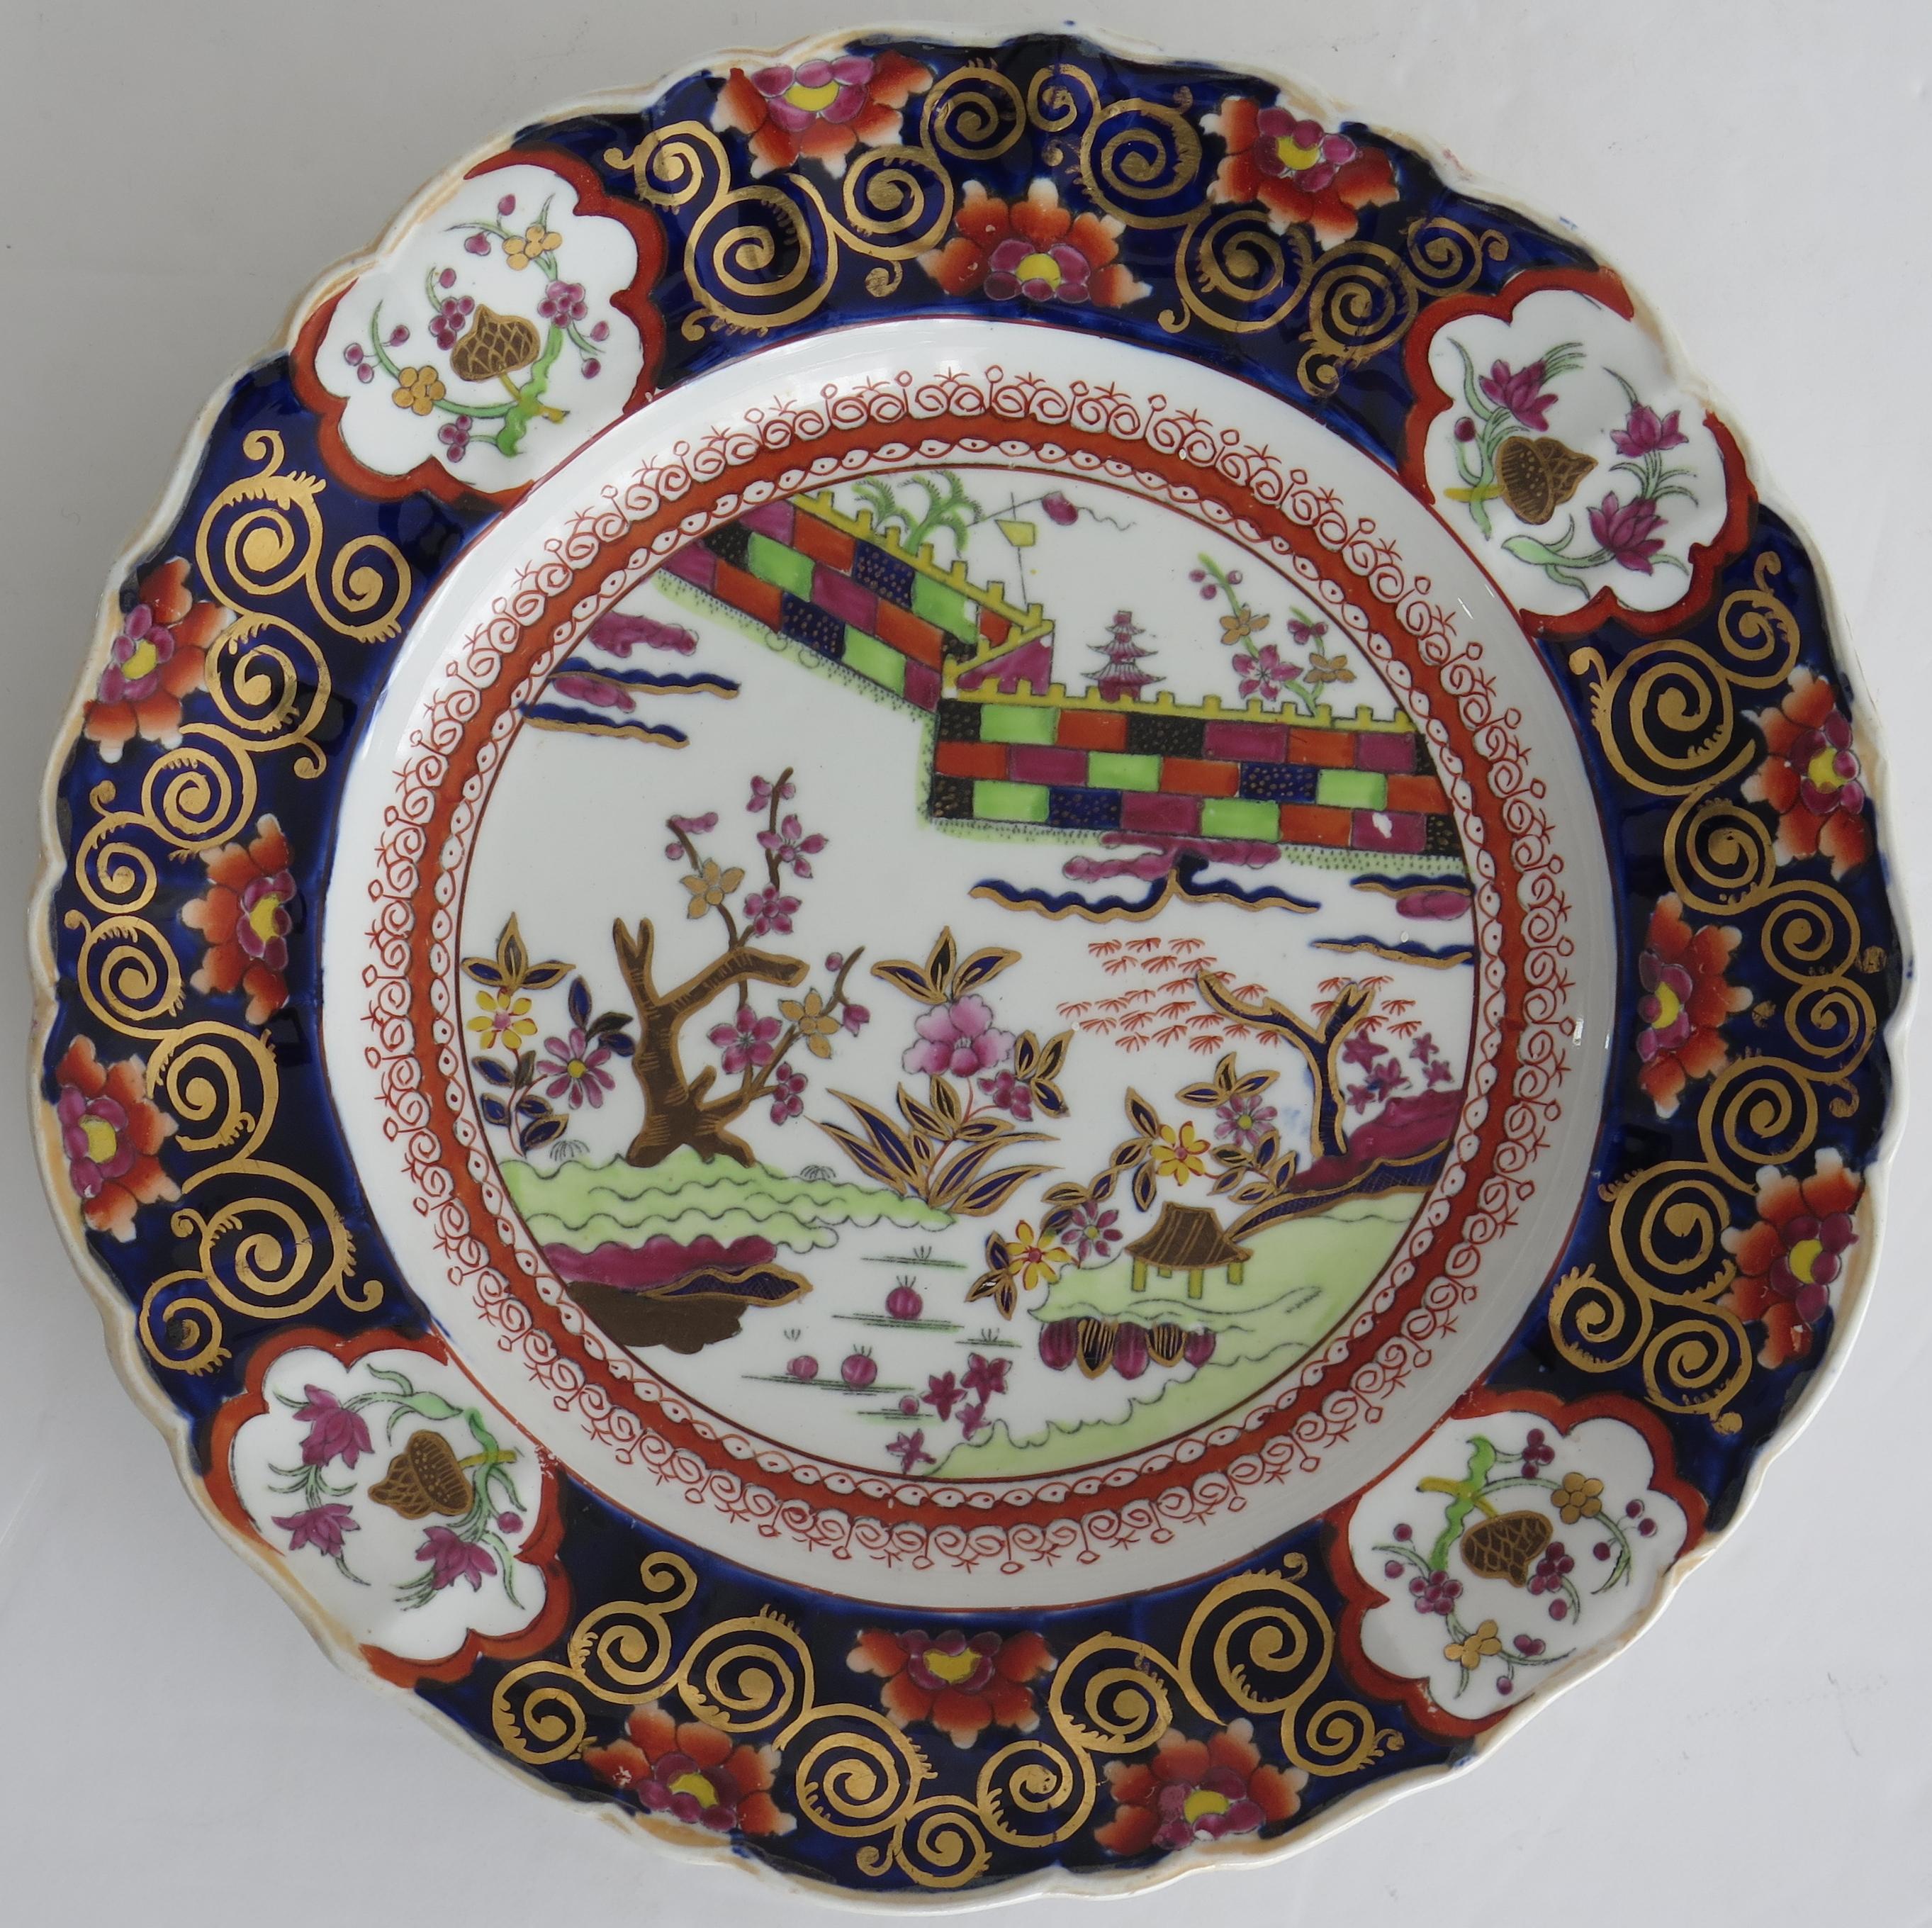 This is an early-19th century Mason’s patent ironstone Desert Plate produced by Mason's Ironstone, England and dating to their earliest period, circa 1815 to 1820.

This plate is beautifully hand decorated in a striking chinoiserie pattern called